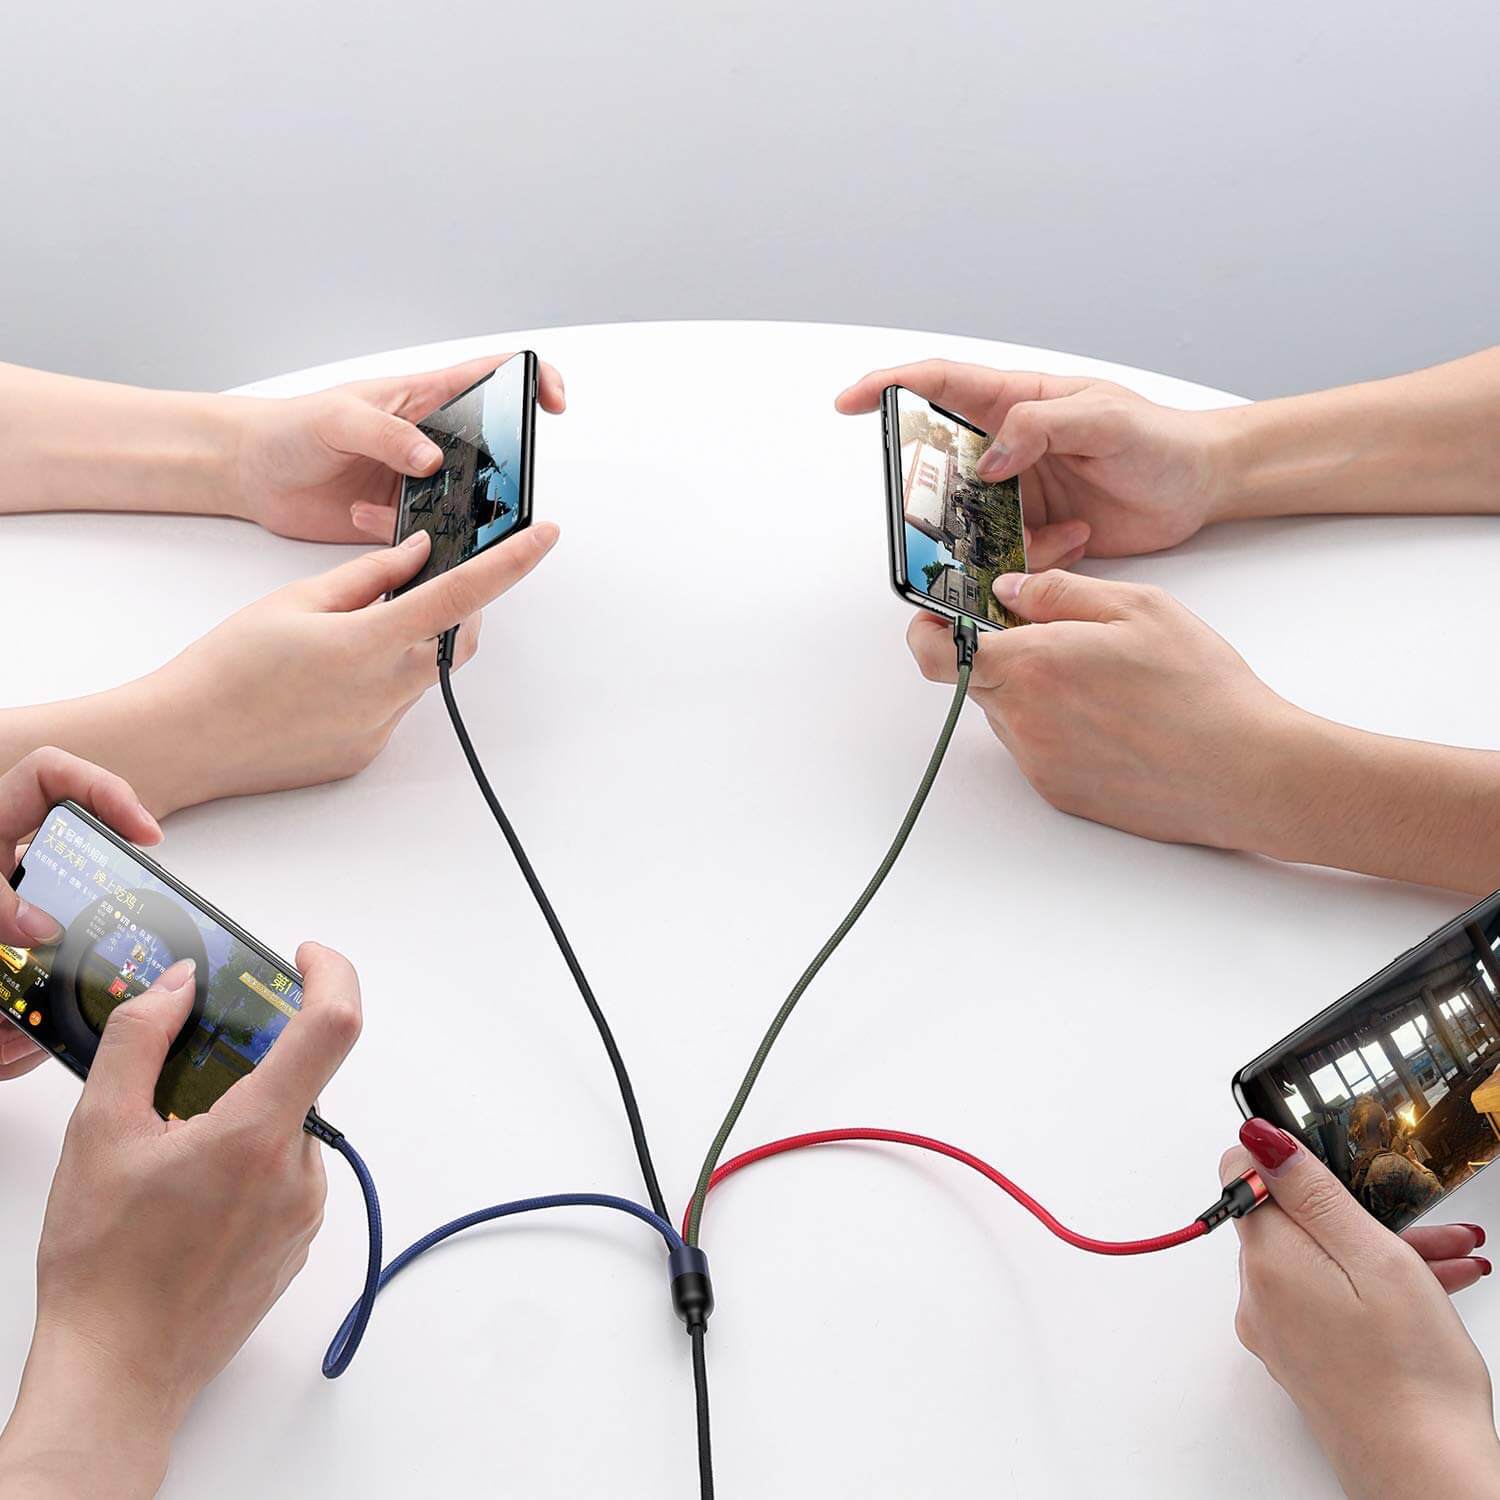 A group simultaneously charging with a multi-cable